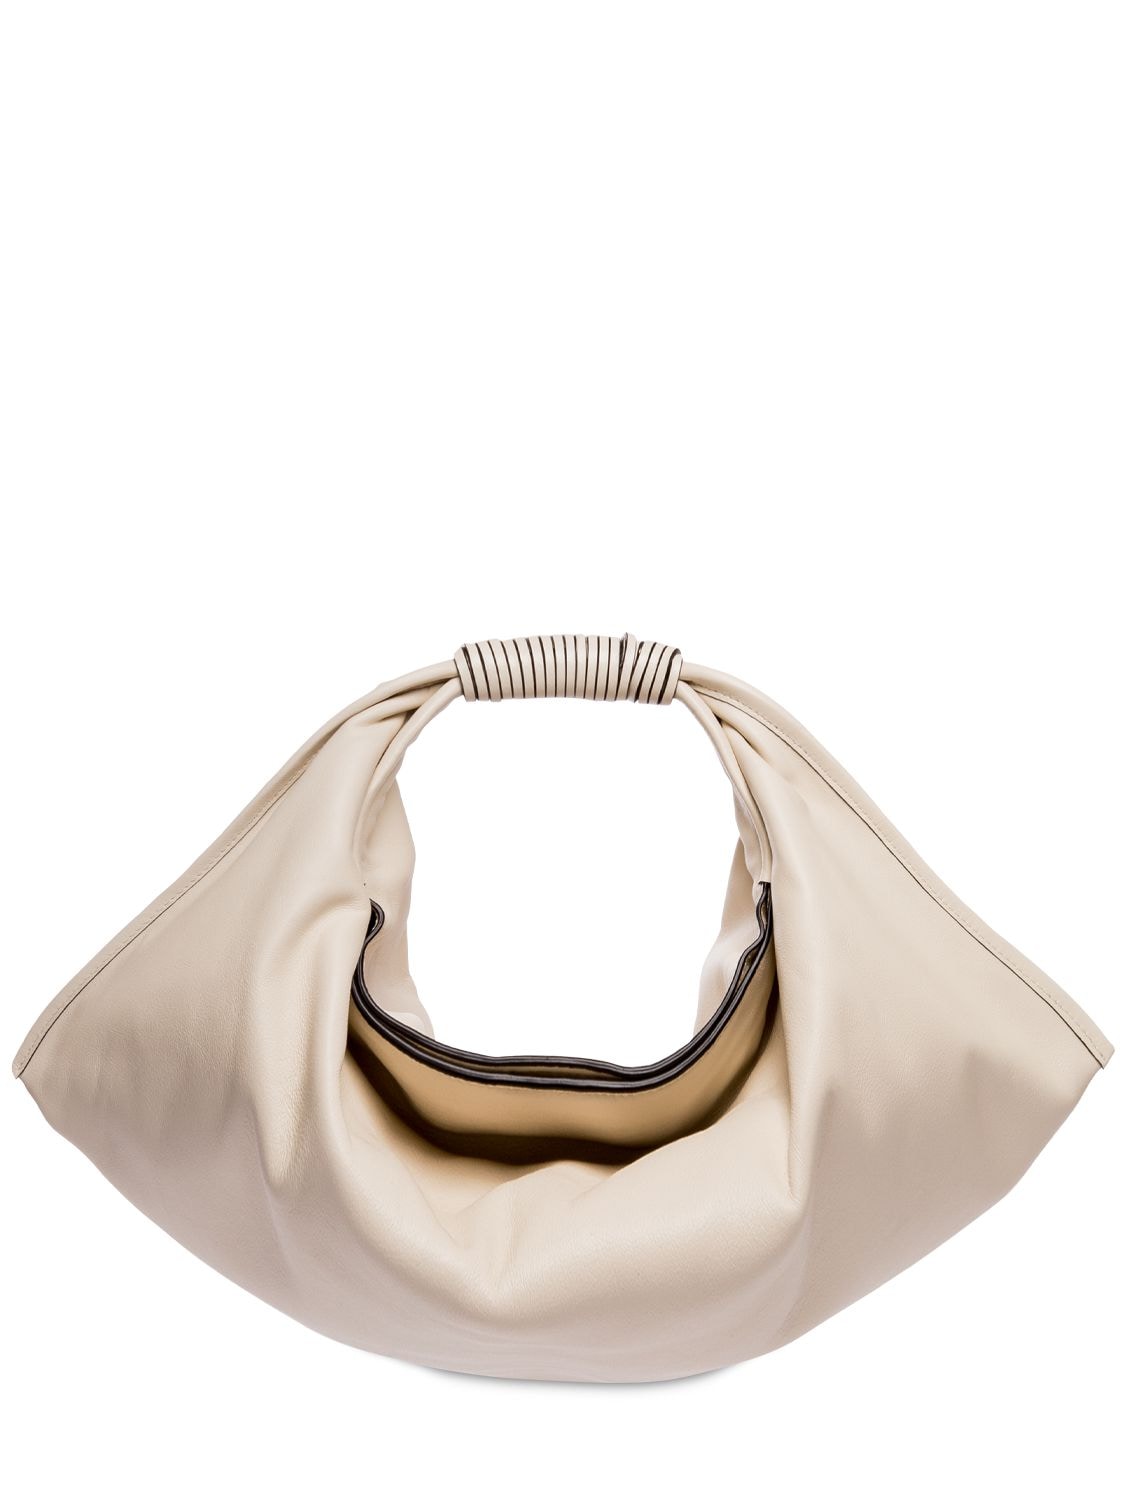 Staud Jetson Nappa Leather Top Handle Bag In Neutrals | ModeSens